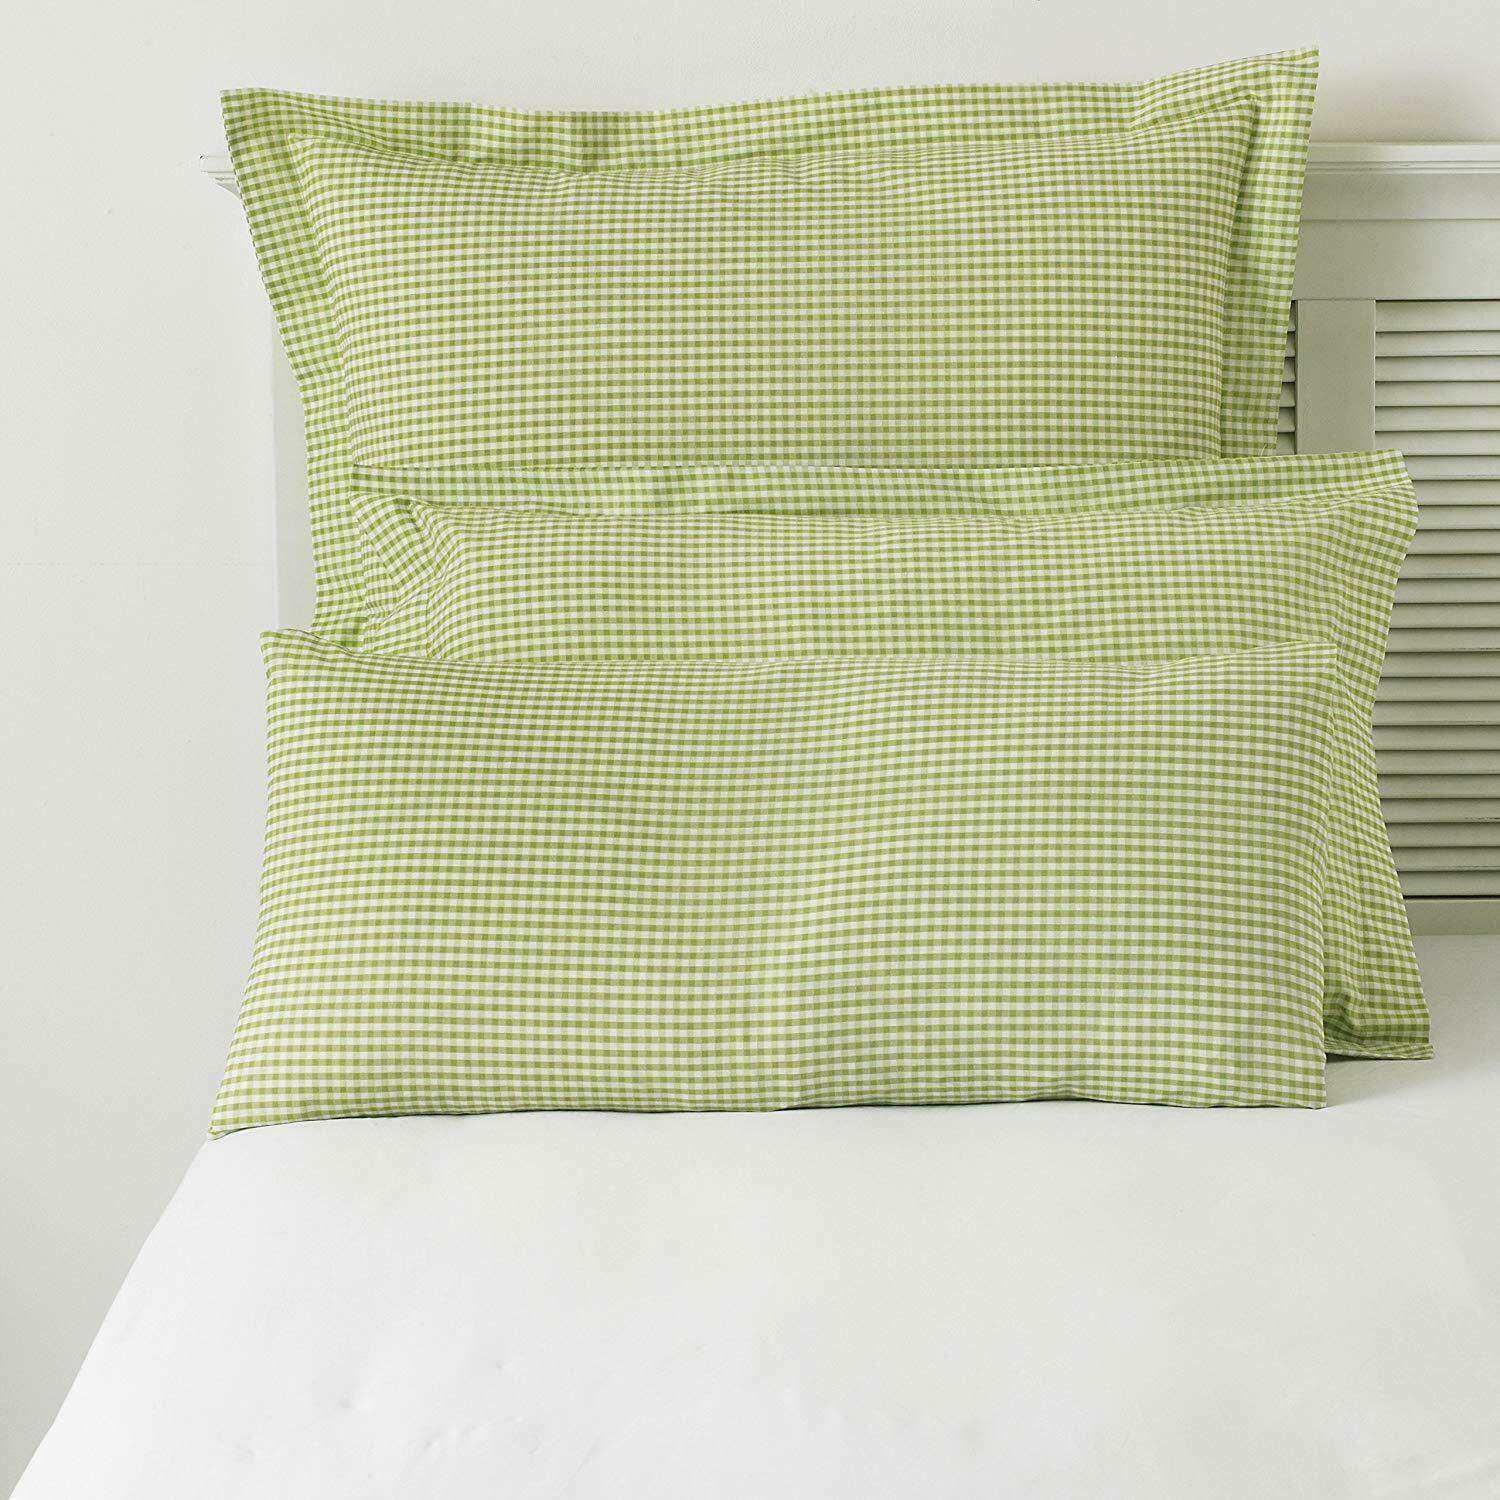 Gingham check pillow covers